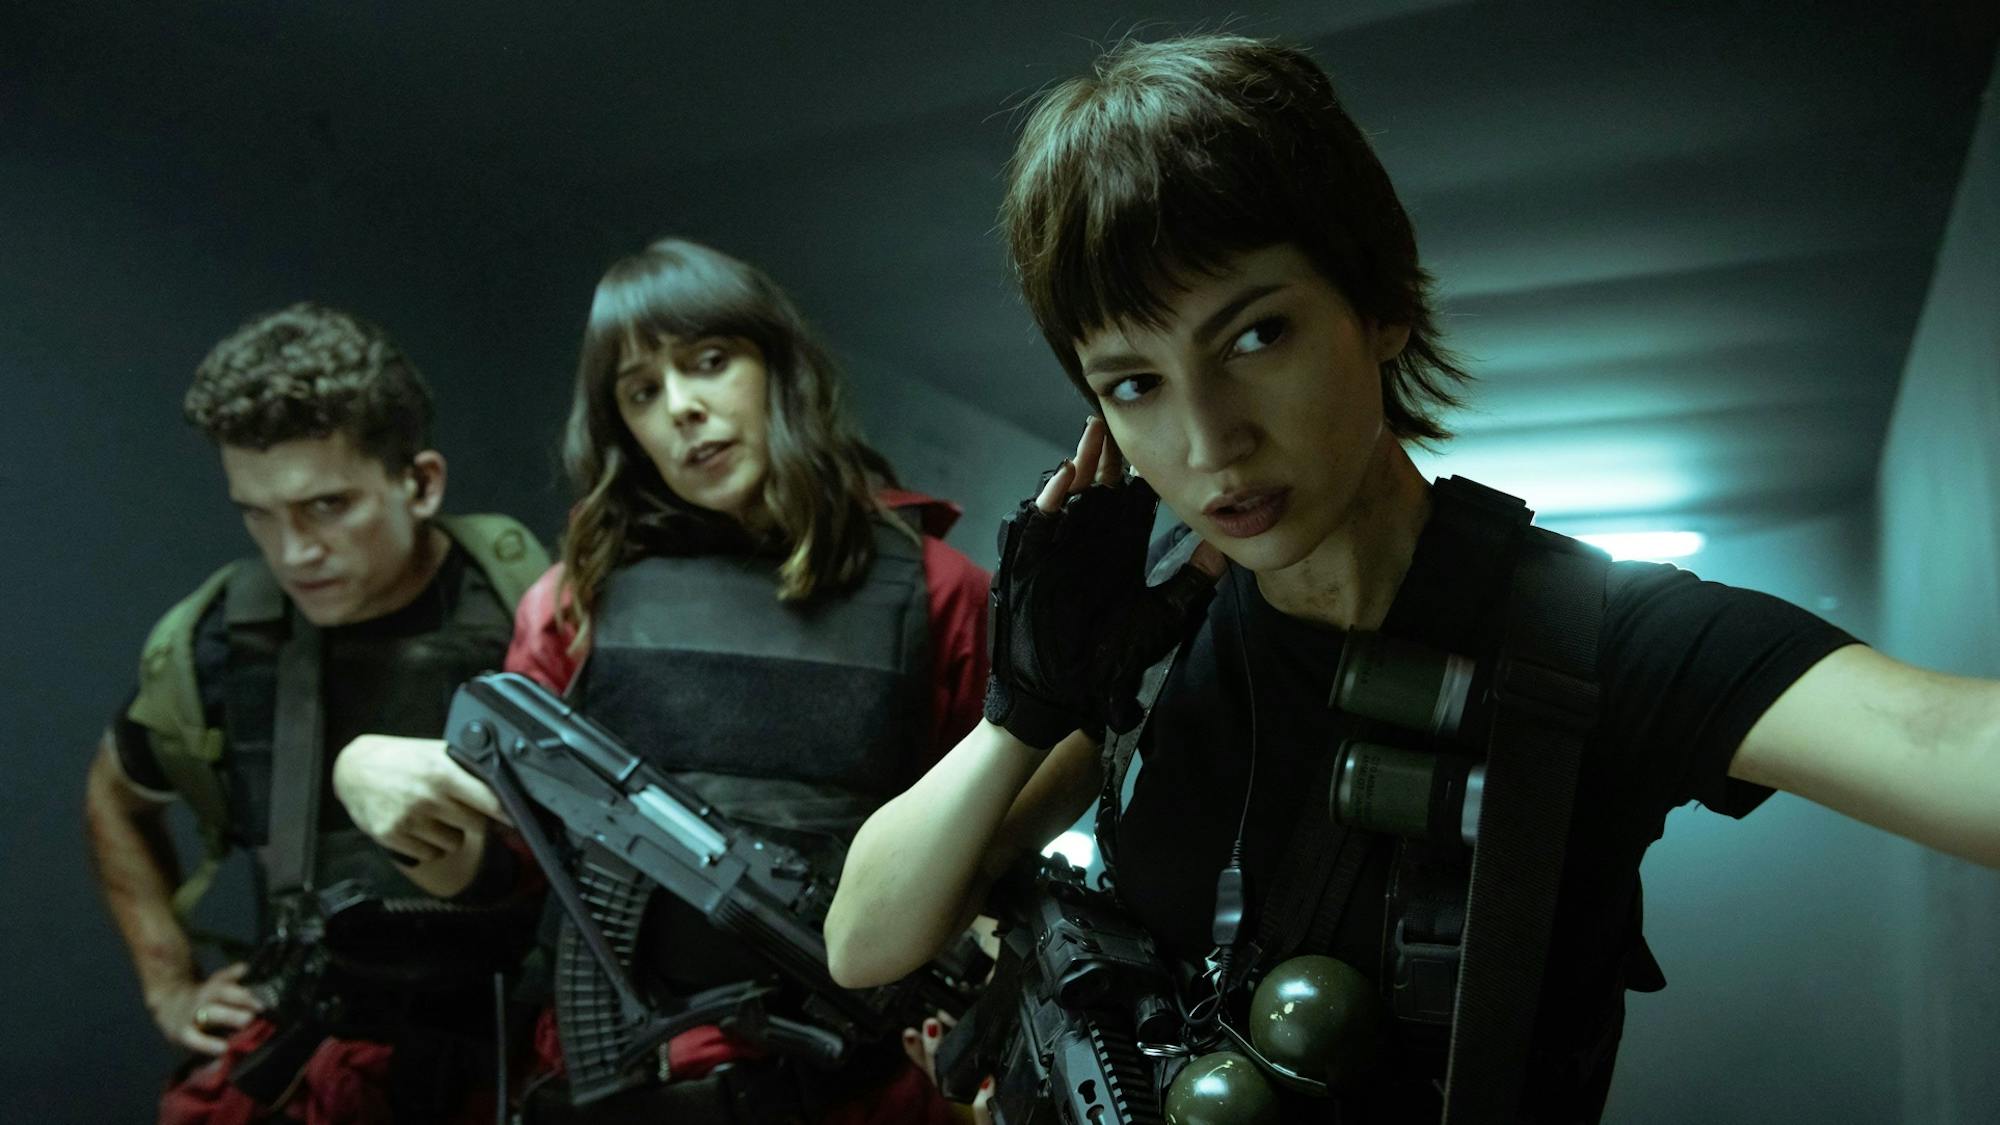 Denver (Jaime Lorente), Malina (Belén Cuesta), and Tokio (Úrsula Corberó) stand in a poorly lit hallway wearing bullet proof vests and carrying guns and grenades.